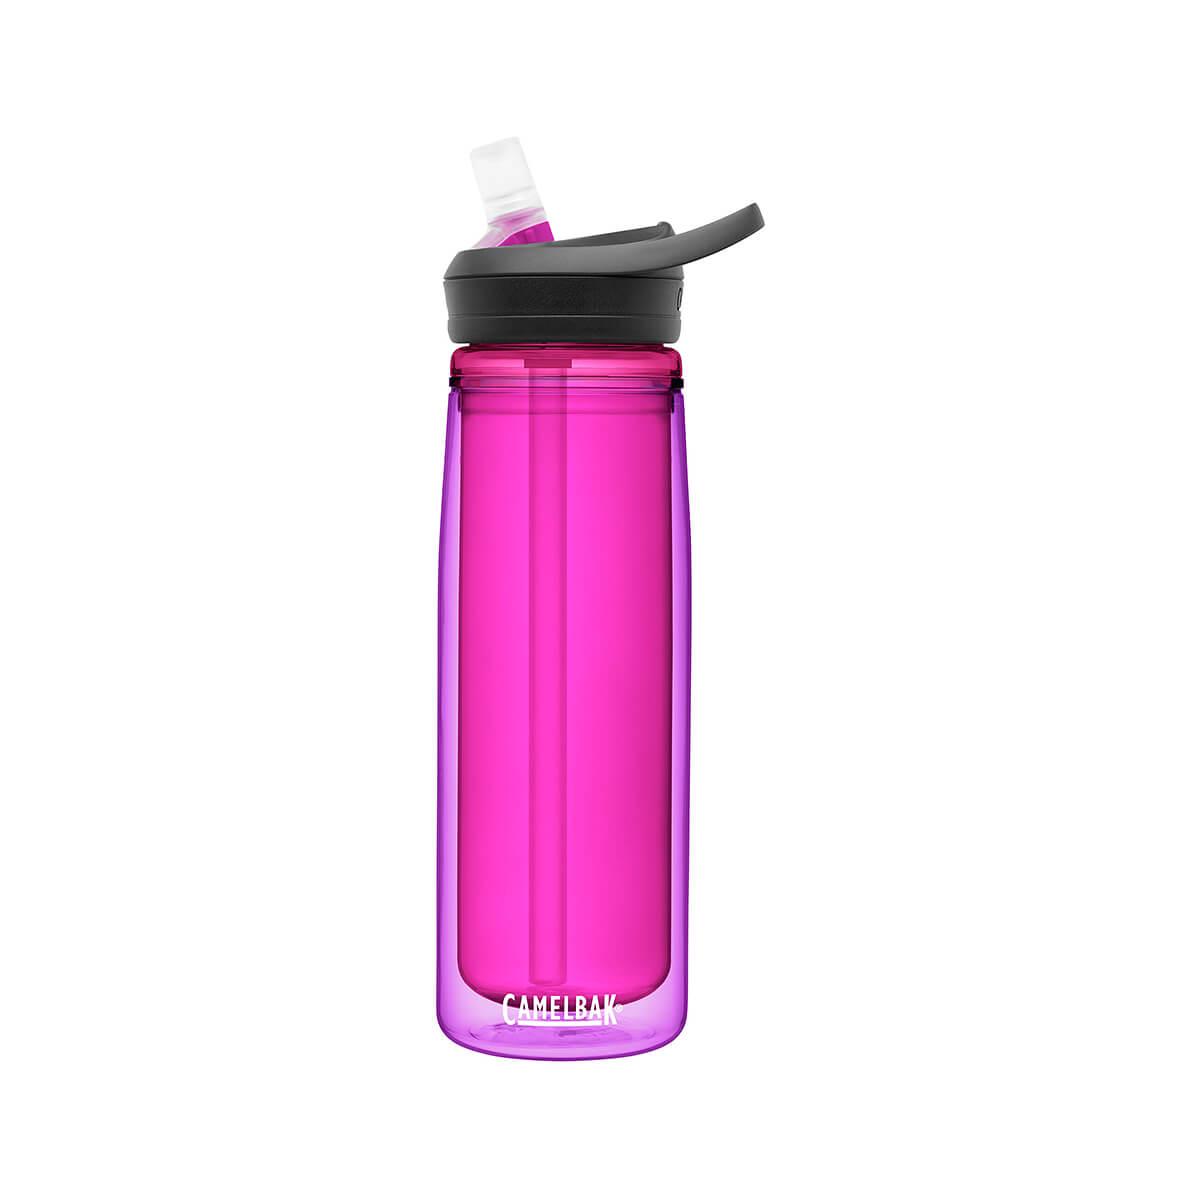  Eddy + Insulated Bottle With Tritan Renew - 20 Ounce